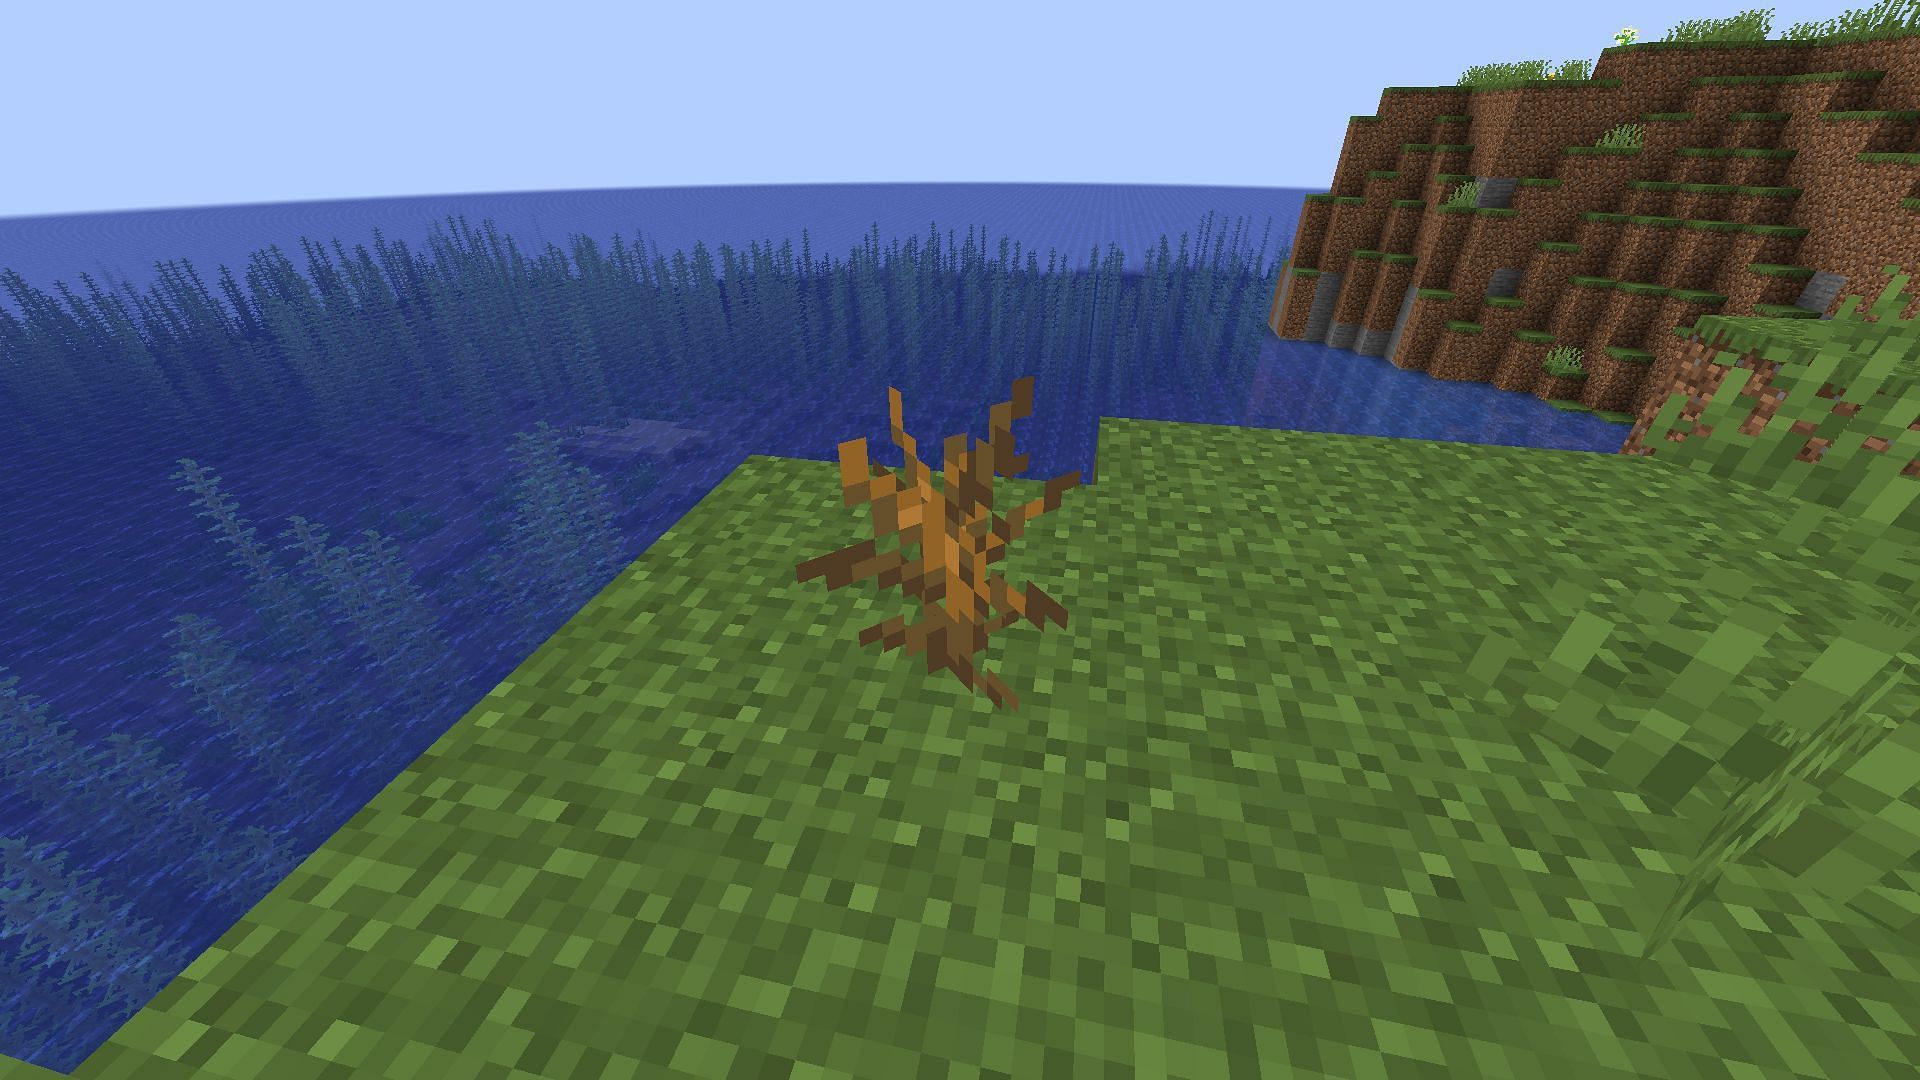 Dead Bush can only drop a couple of sticks in Minecraft (Image via Mojang)